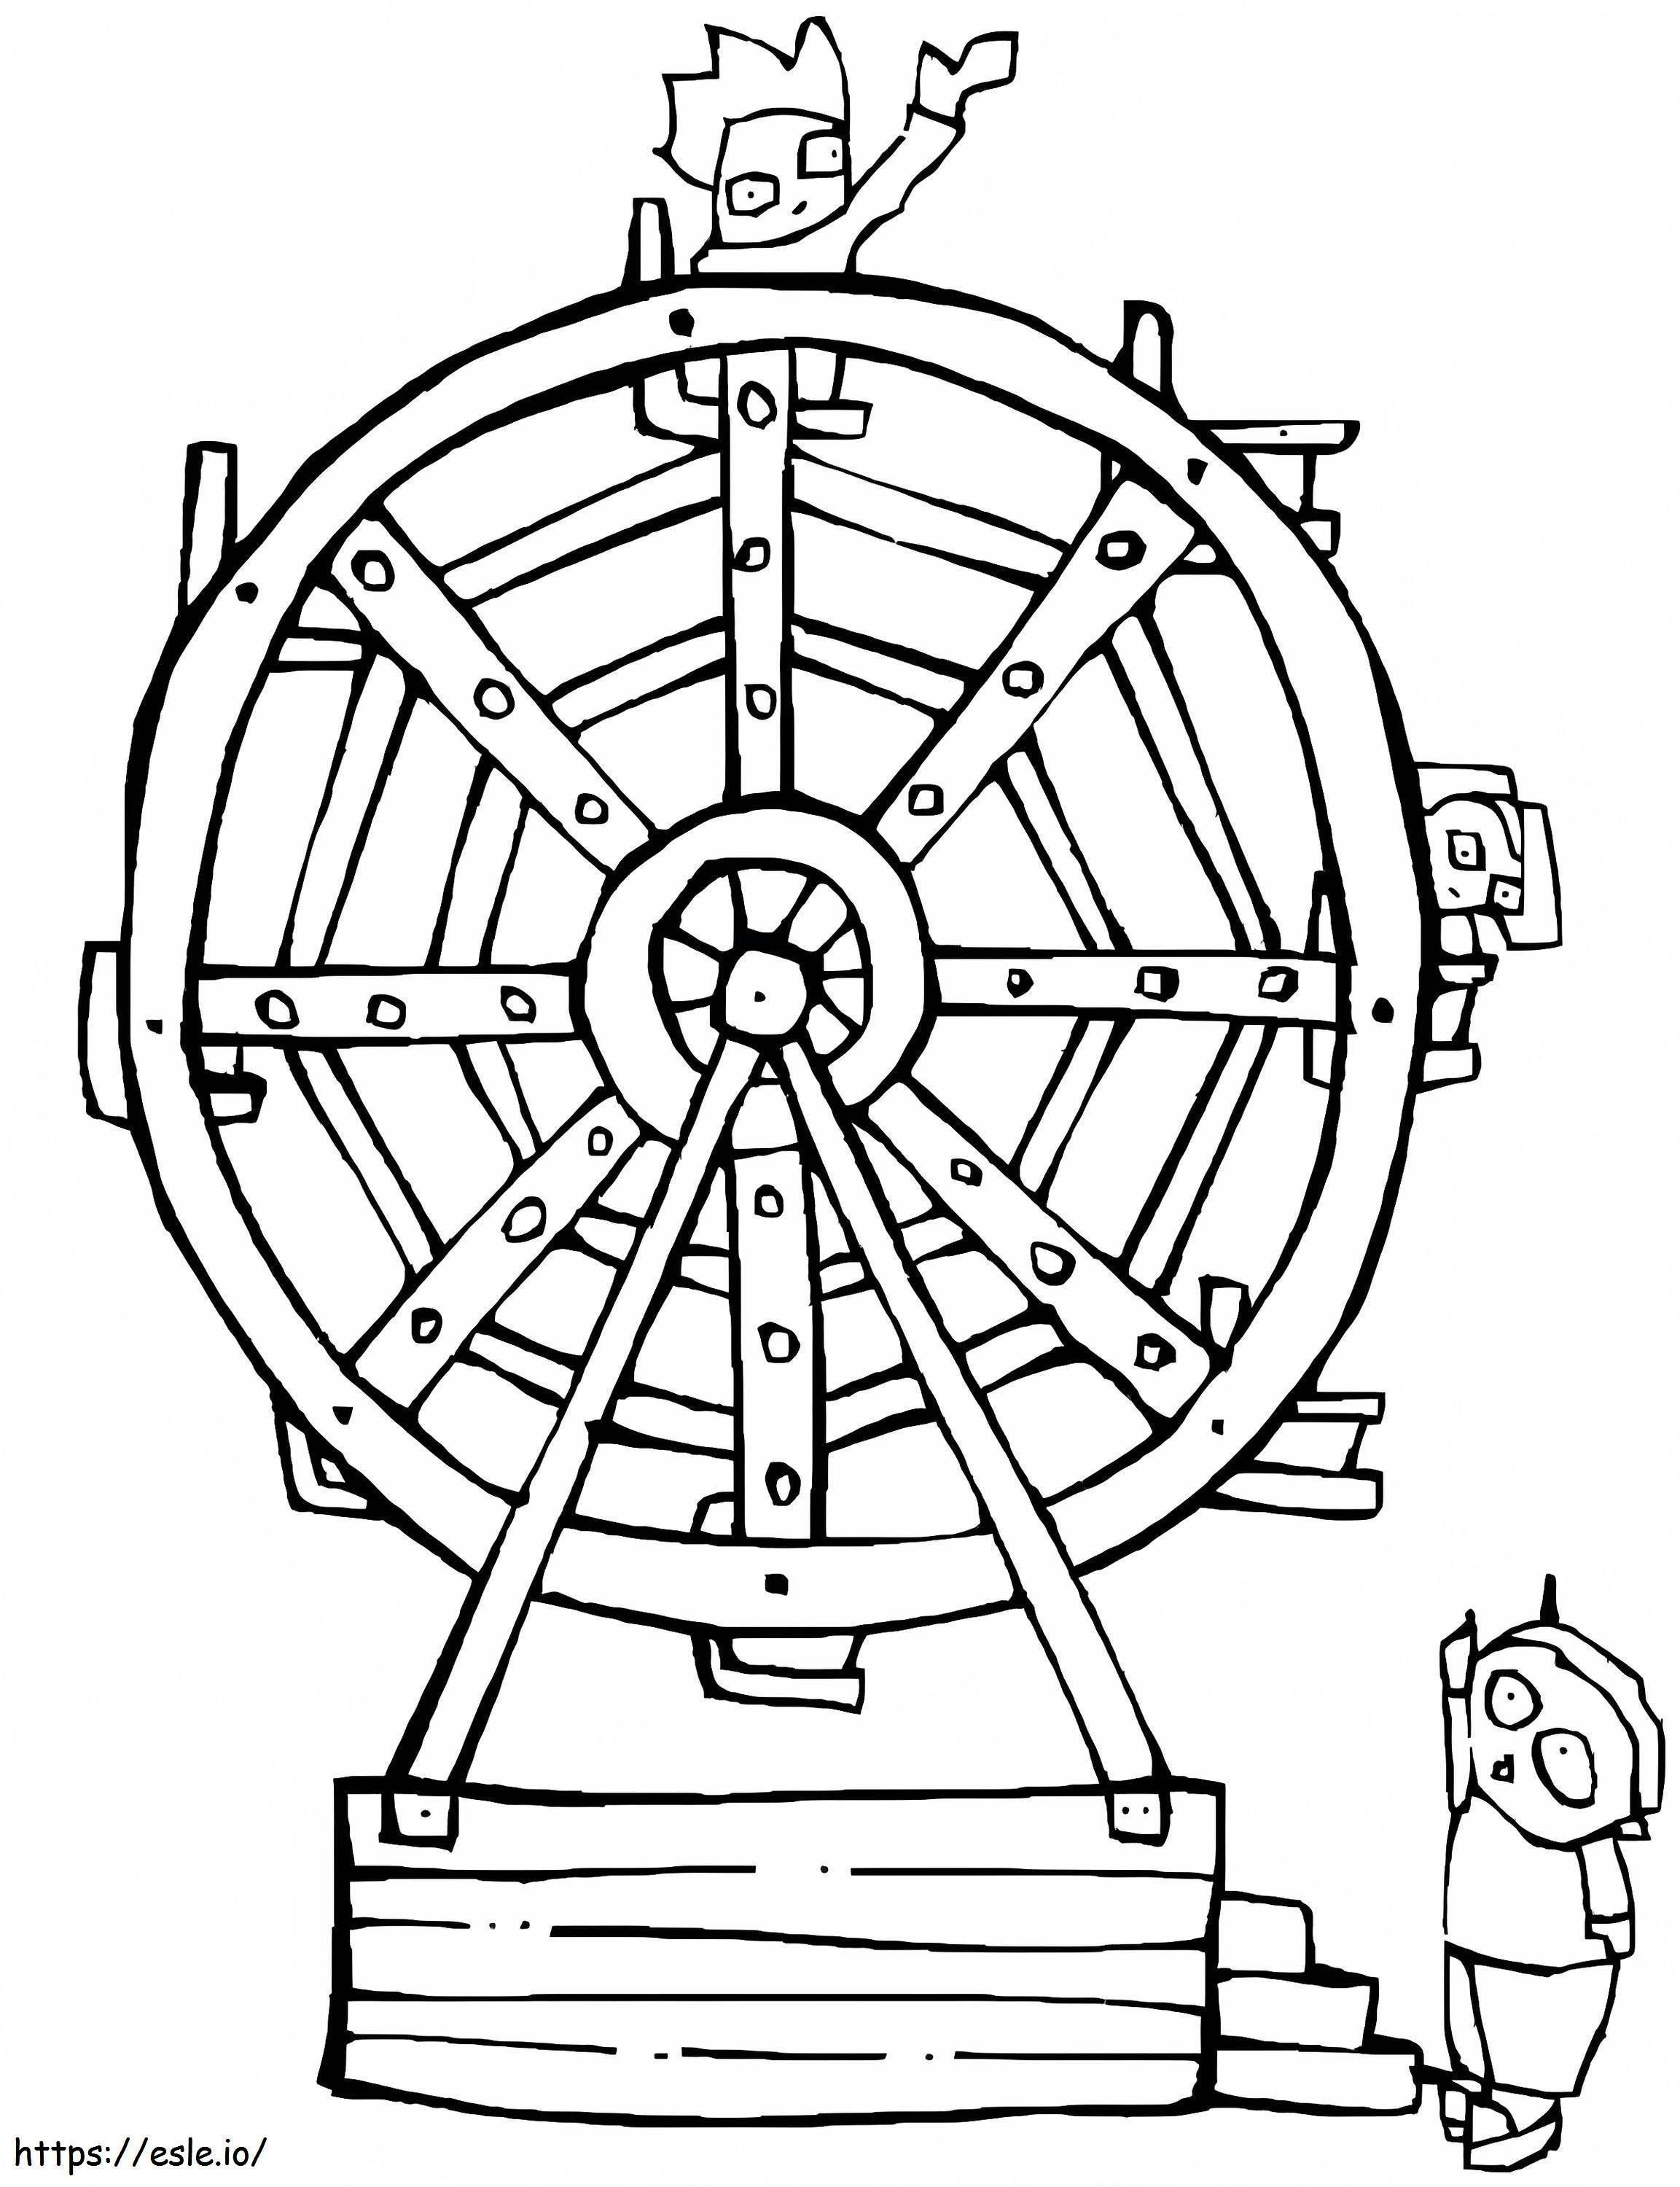 Funny Ferris Wheel coloring page